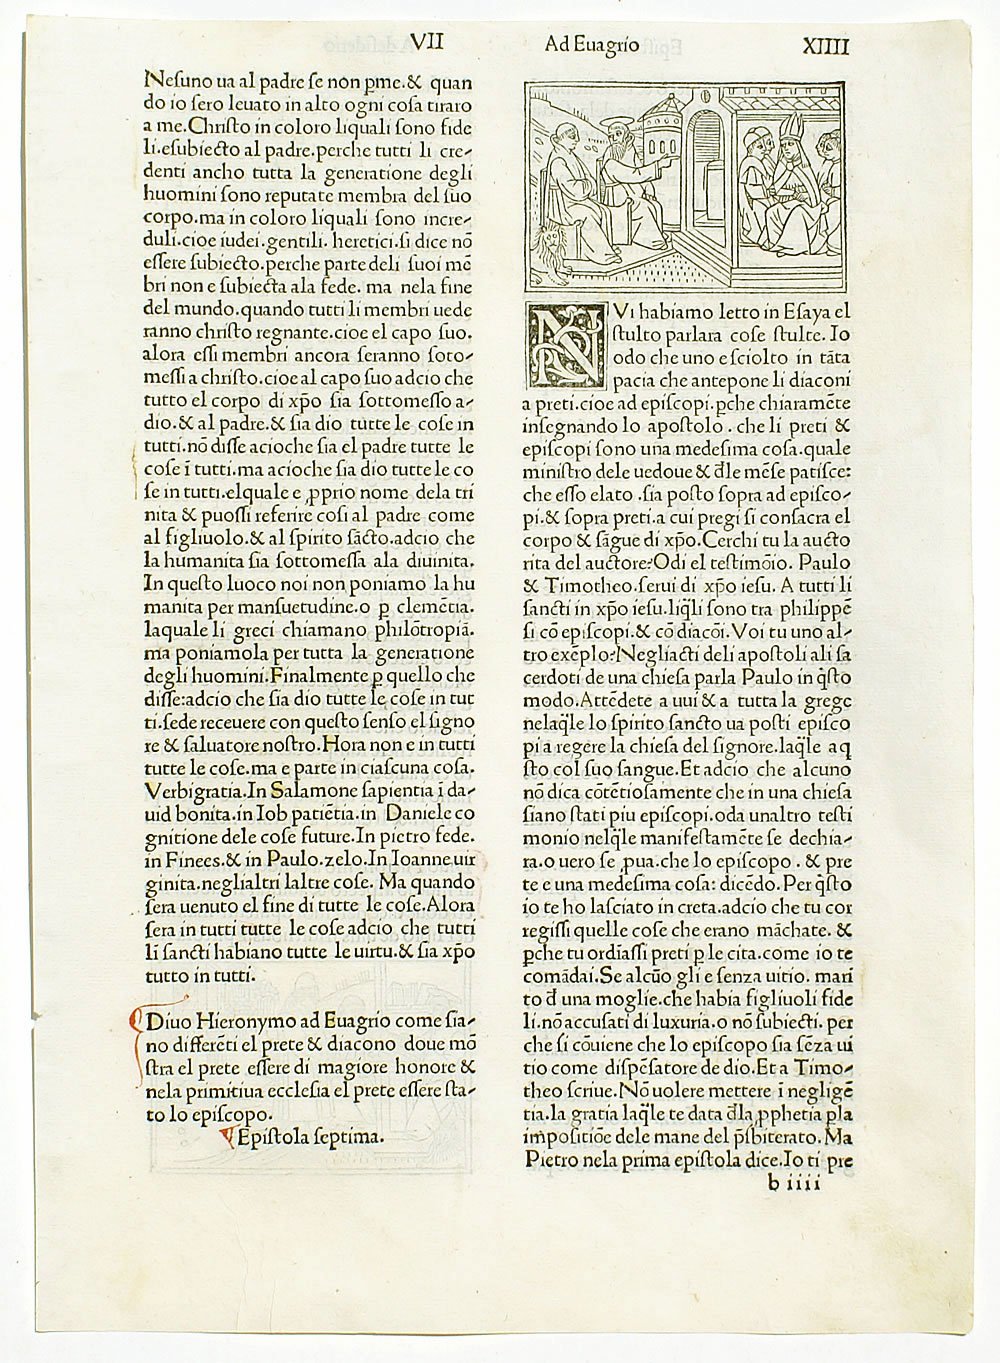 1497 Rare leaf from Jerome's Letters, Printed in Ferrara